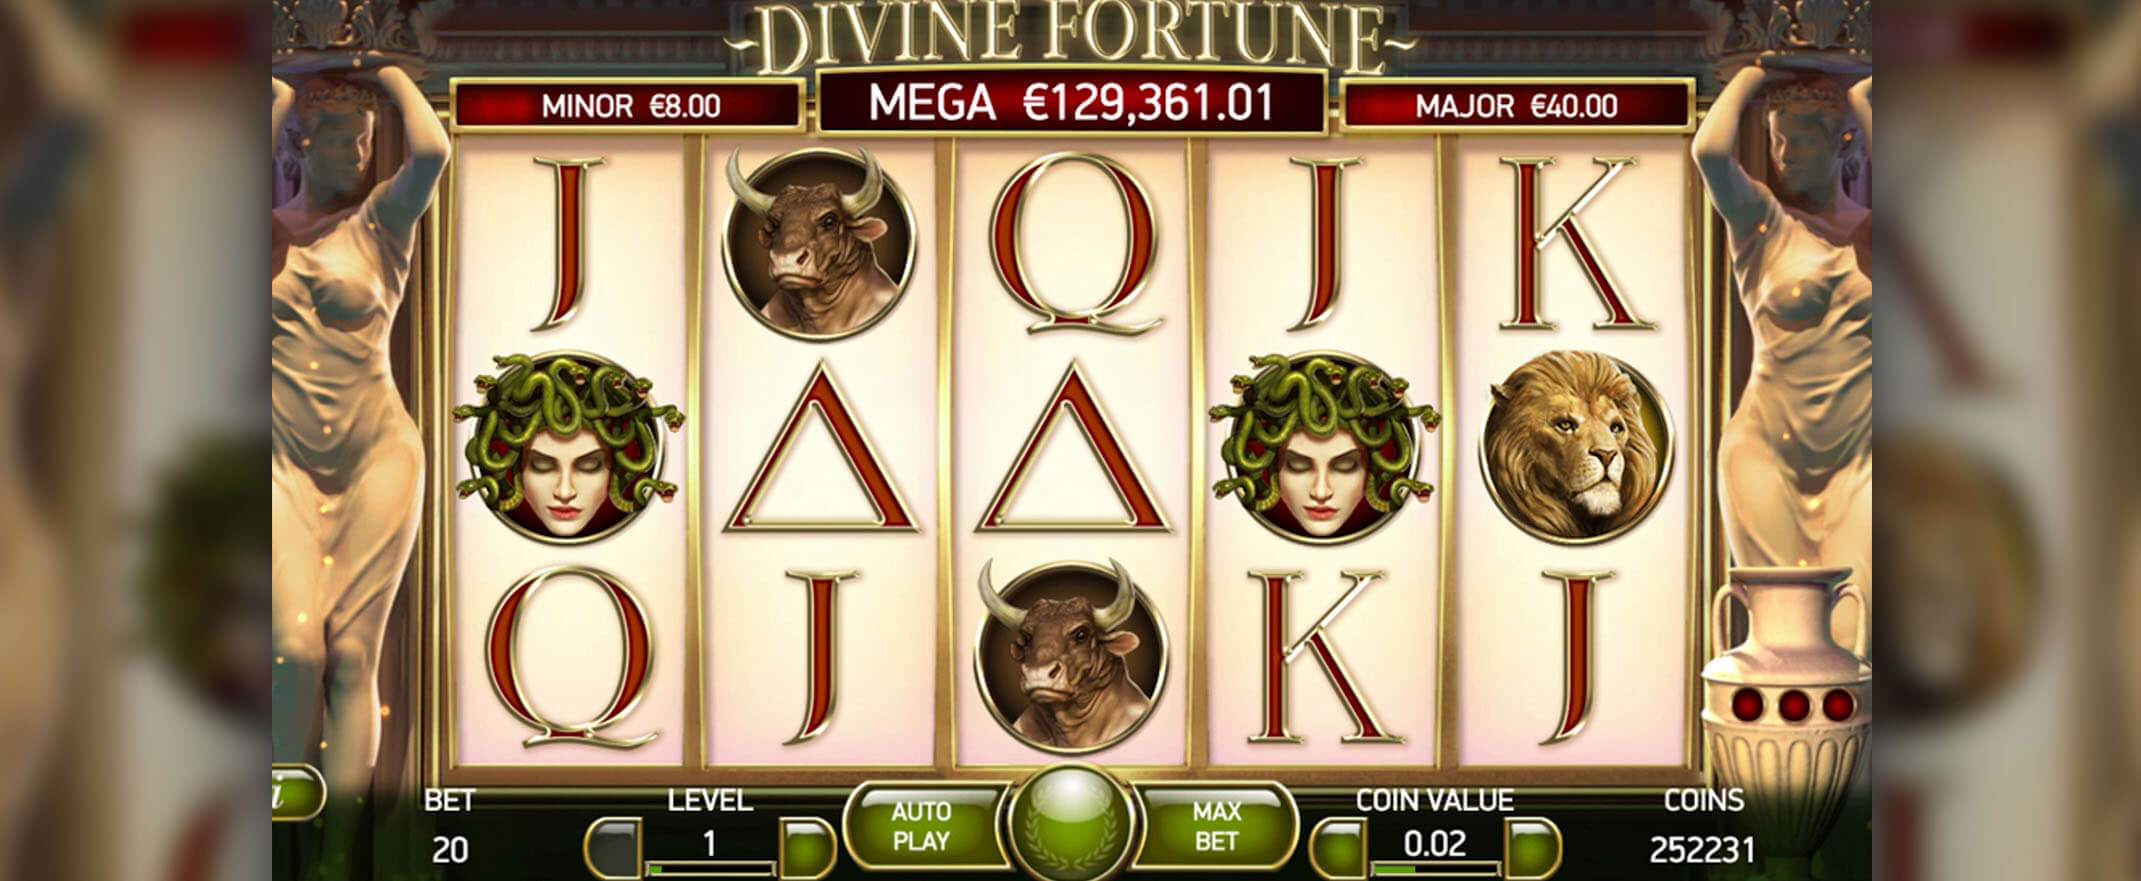 Divine Fortune video slot from NetEnt